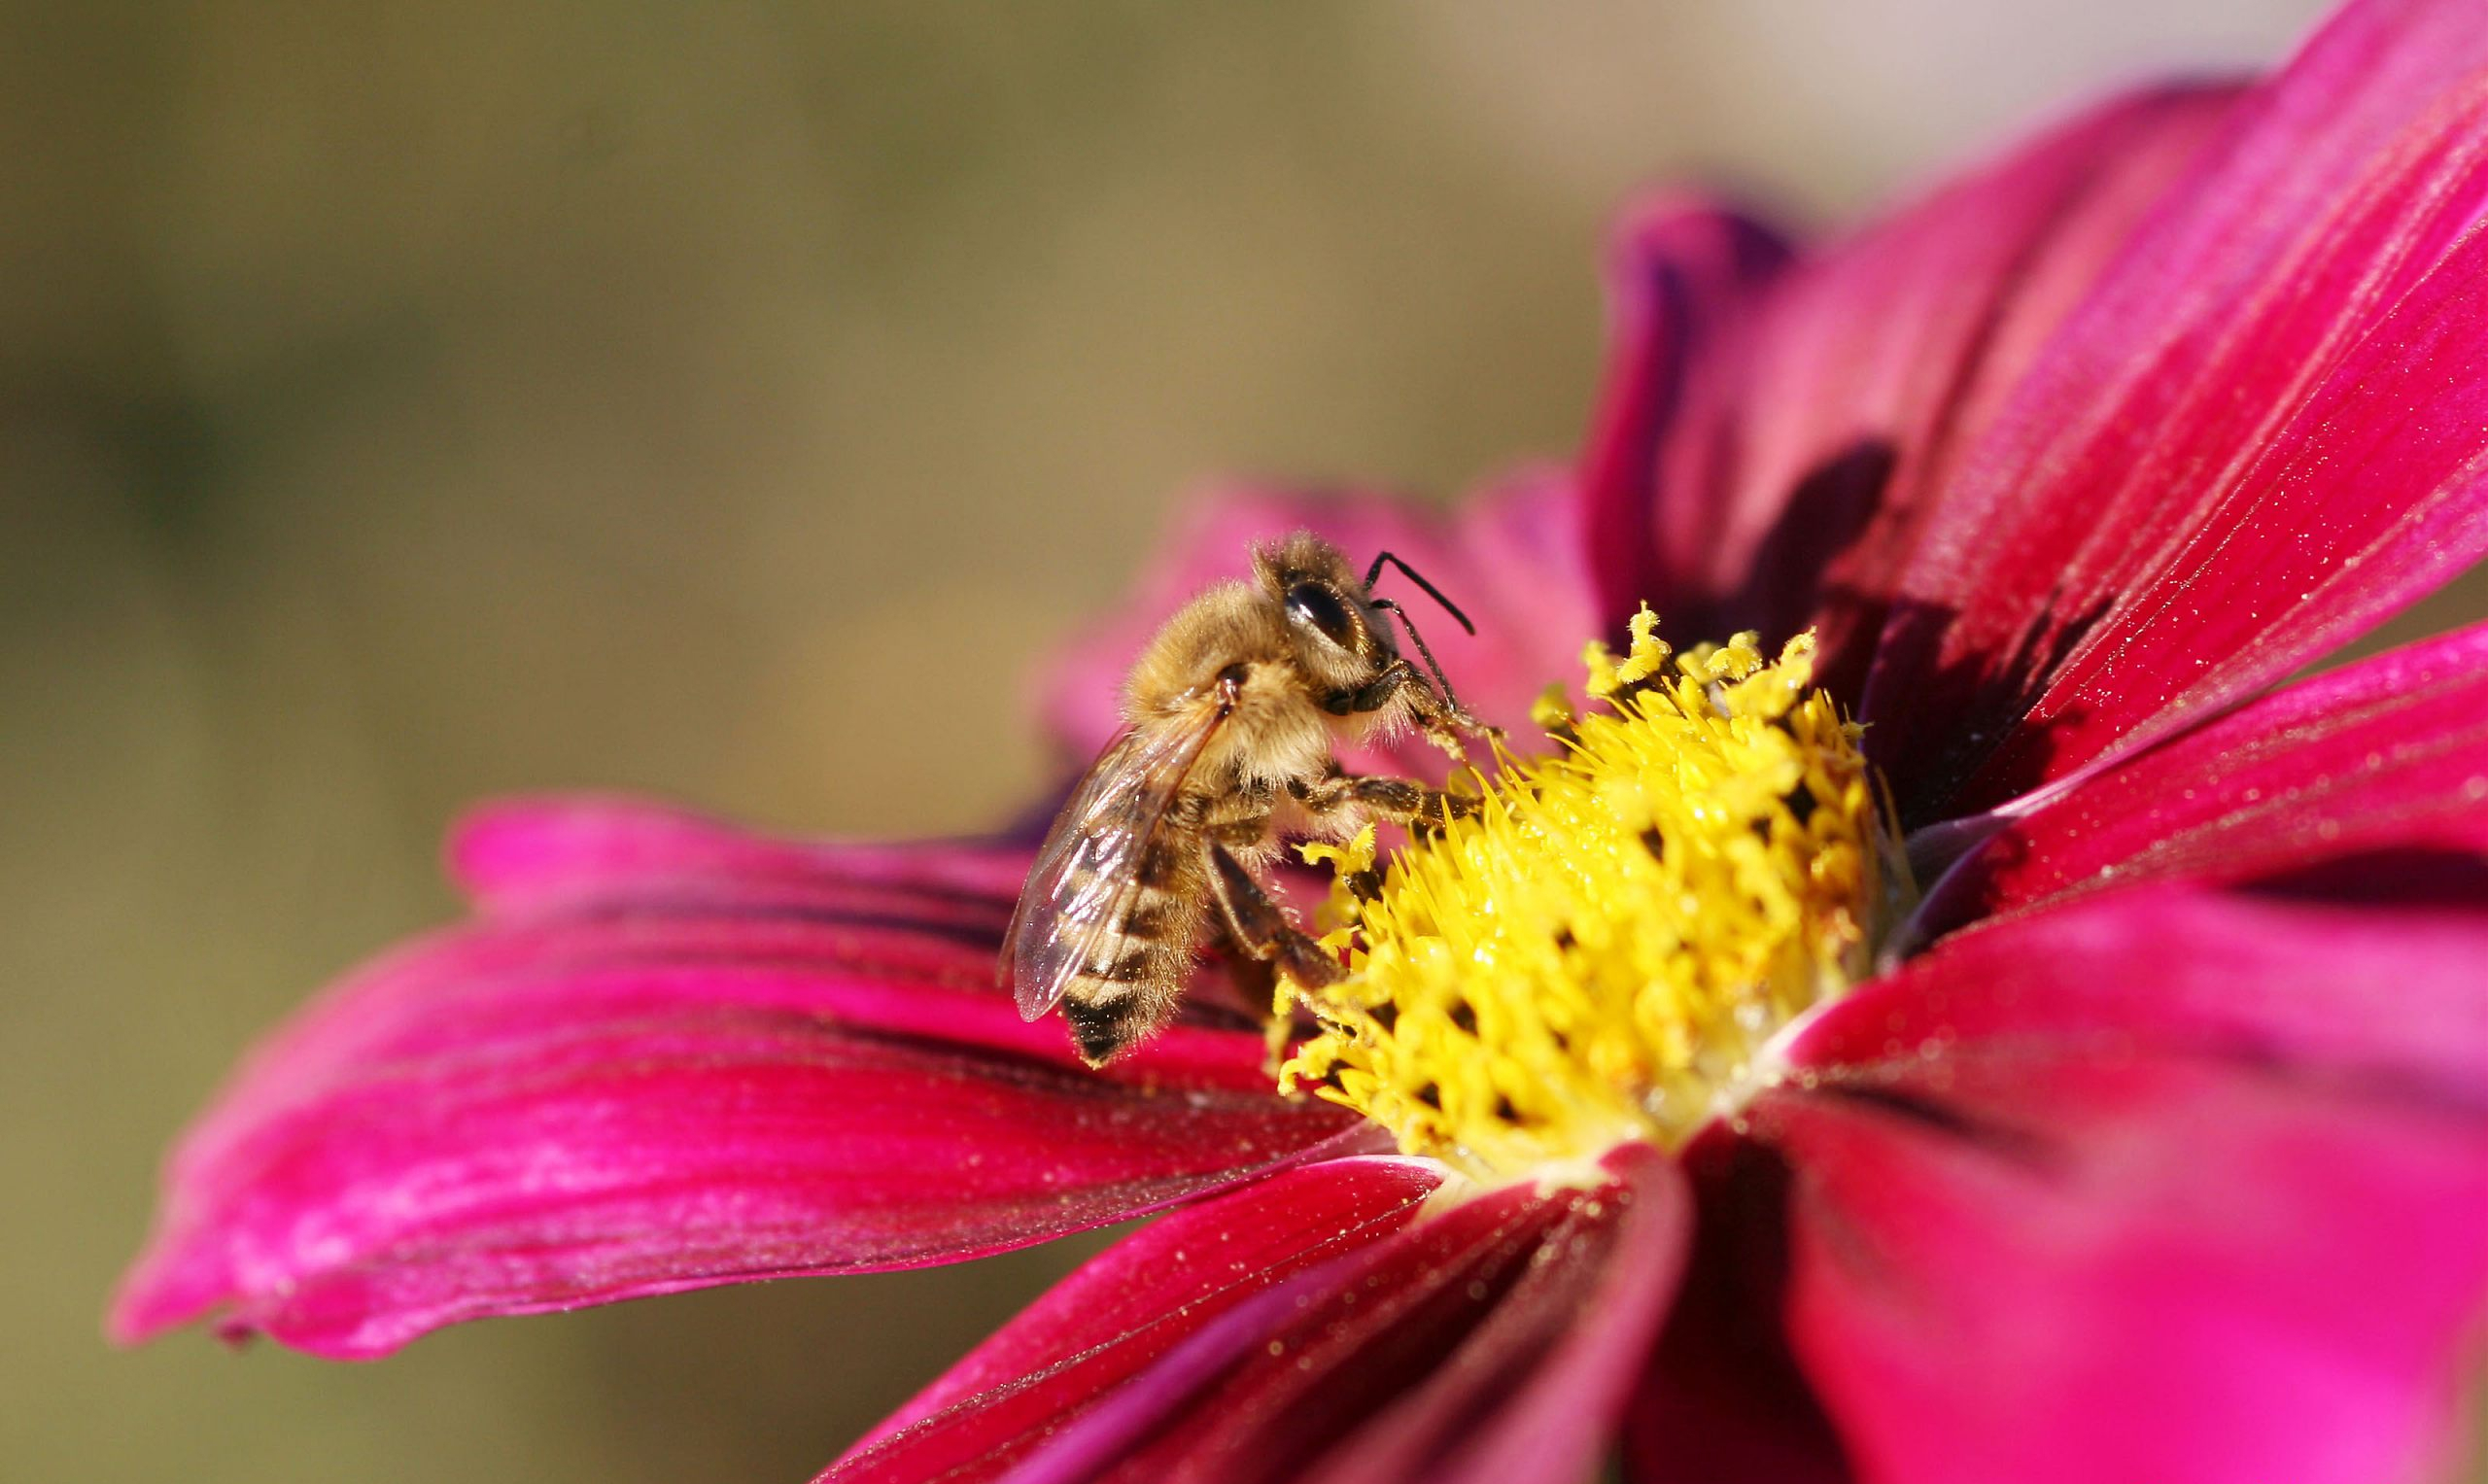 Animal and insect - A close-up shot of a bee on a beautiful flower.